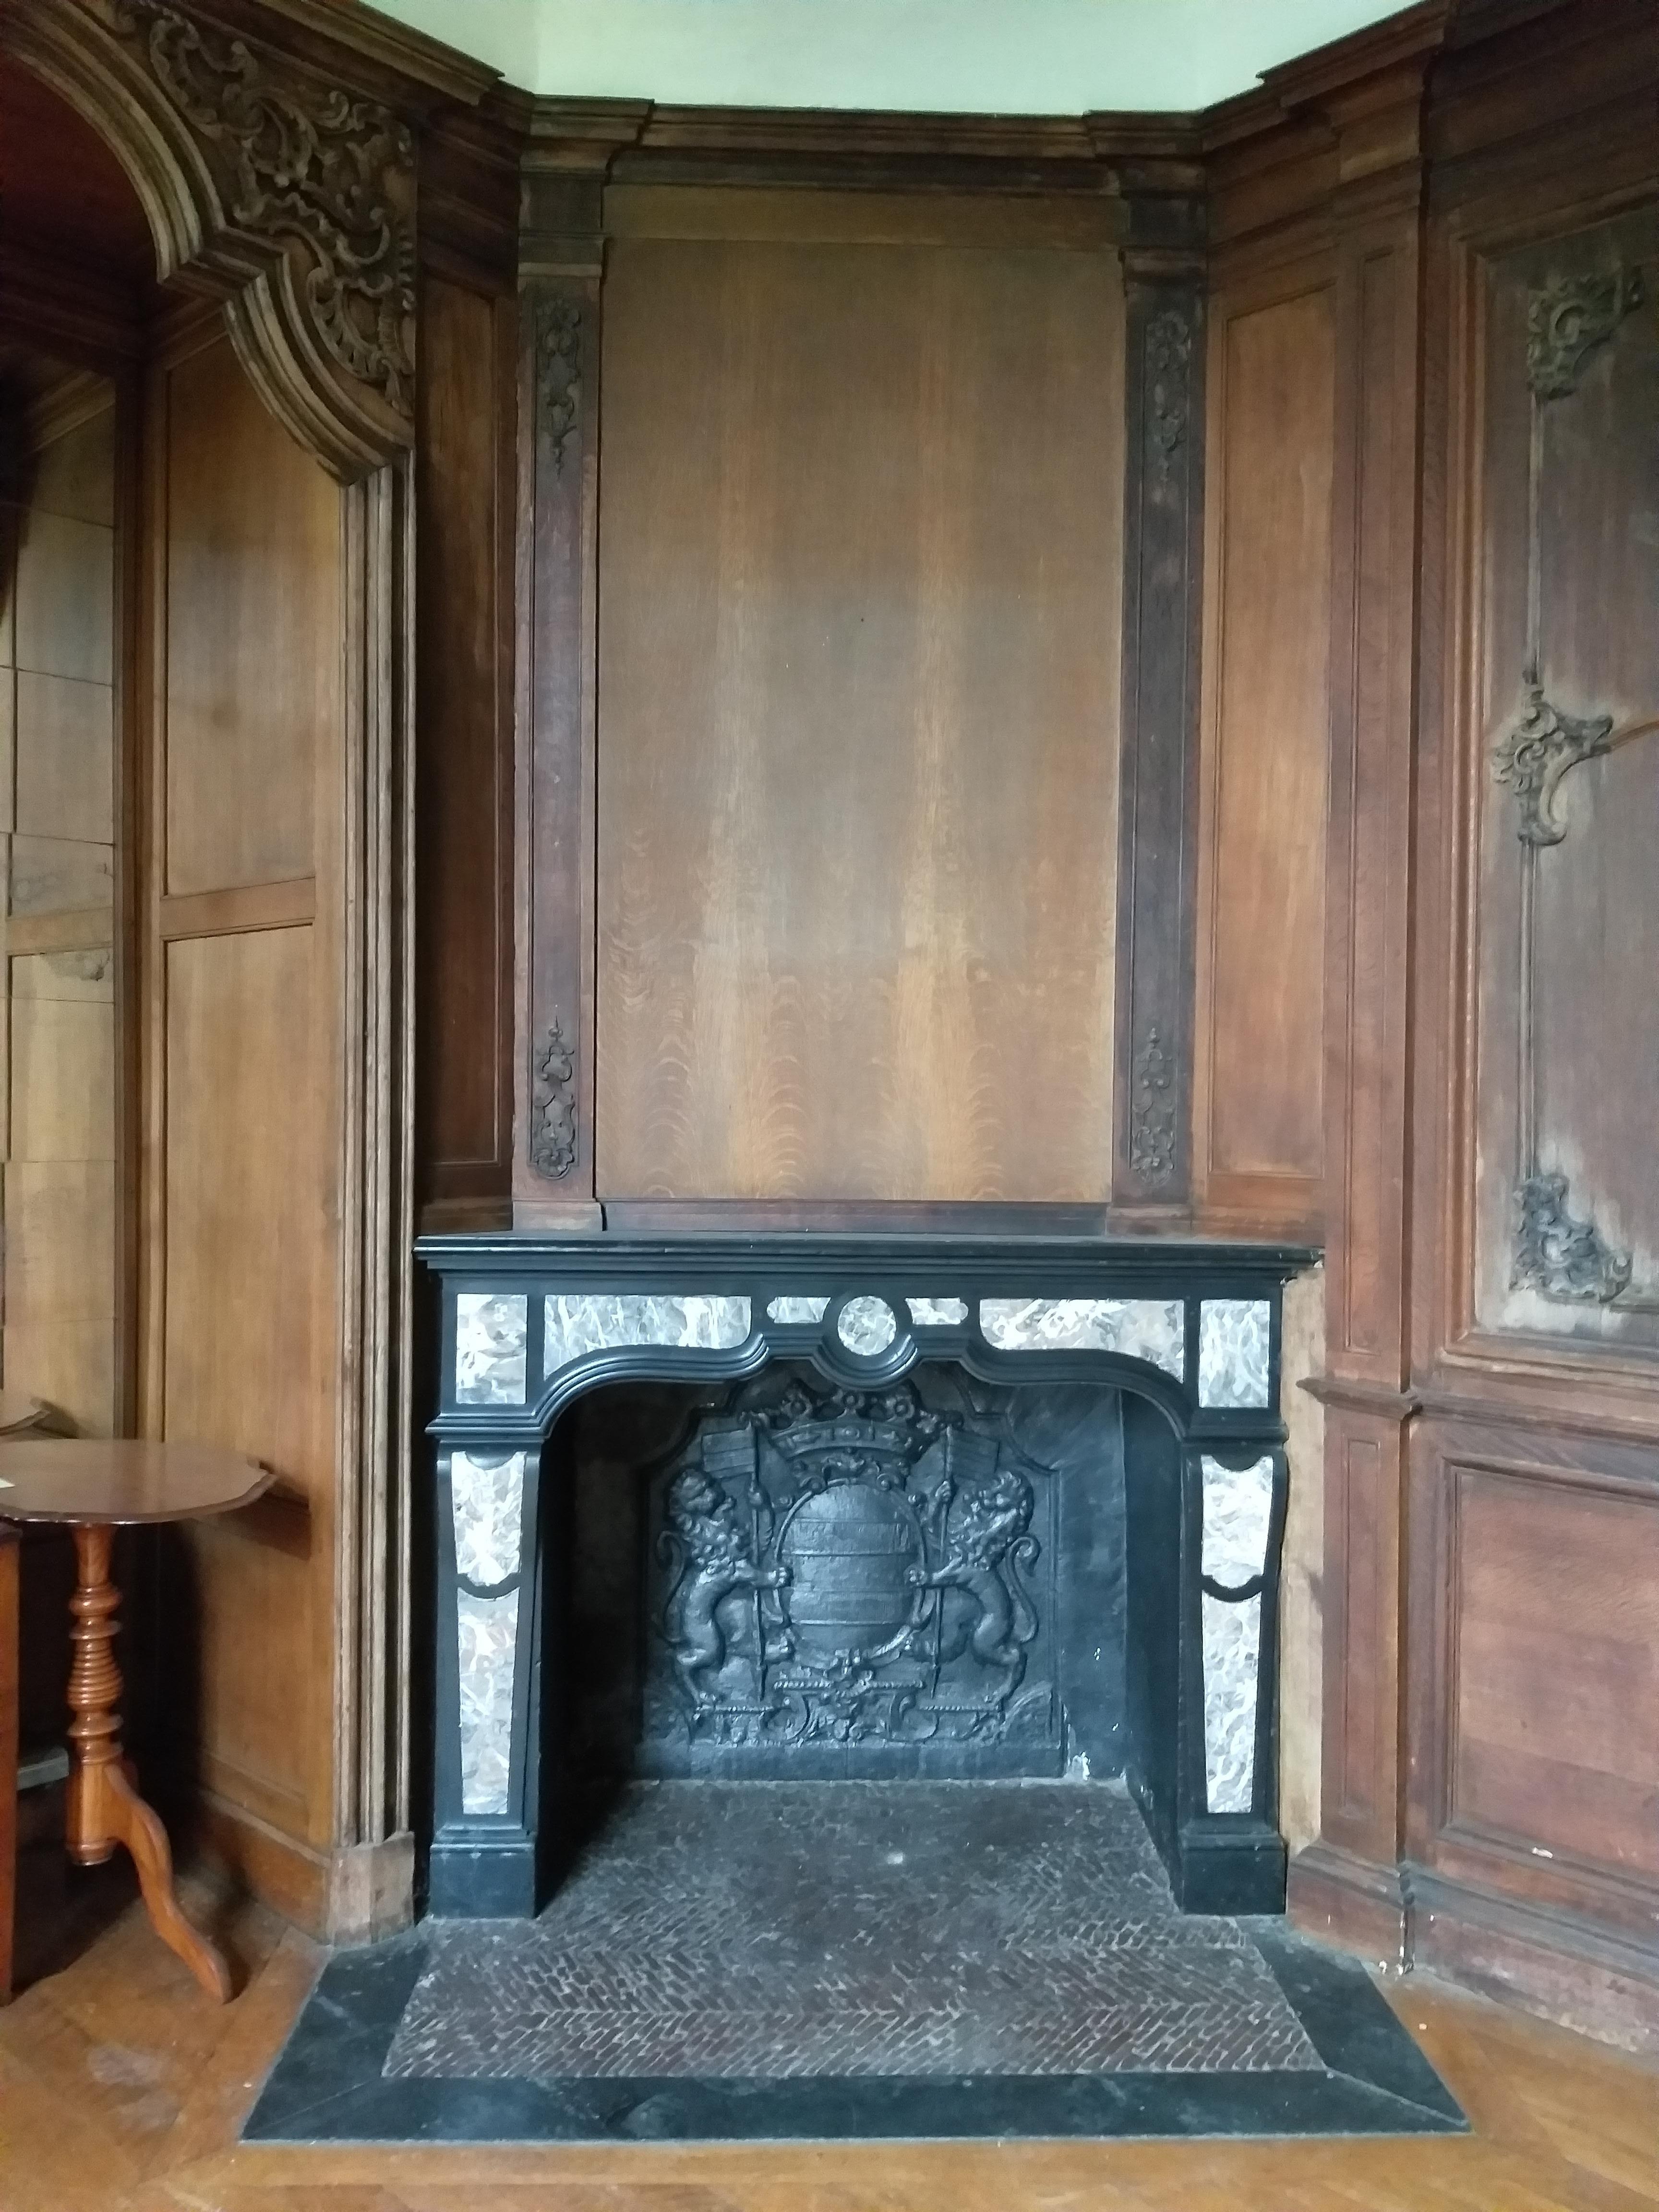 This complet, beautiful masterbed bedroom features finely carved oak wood-panelling with a build-in Belgian marble fireplace.
With a mirrored alcove, one window and a pair of beautiful doors. Extra doors from the same chateau can be